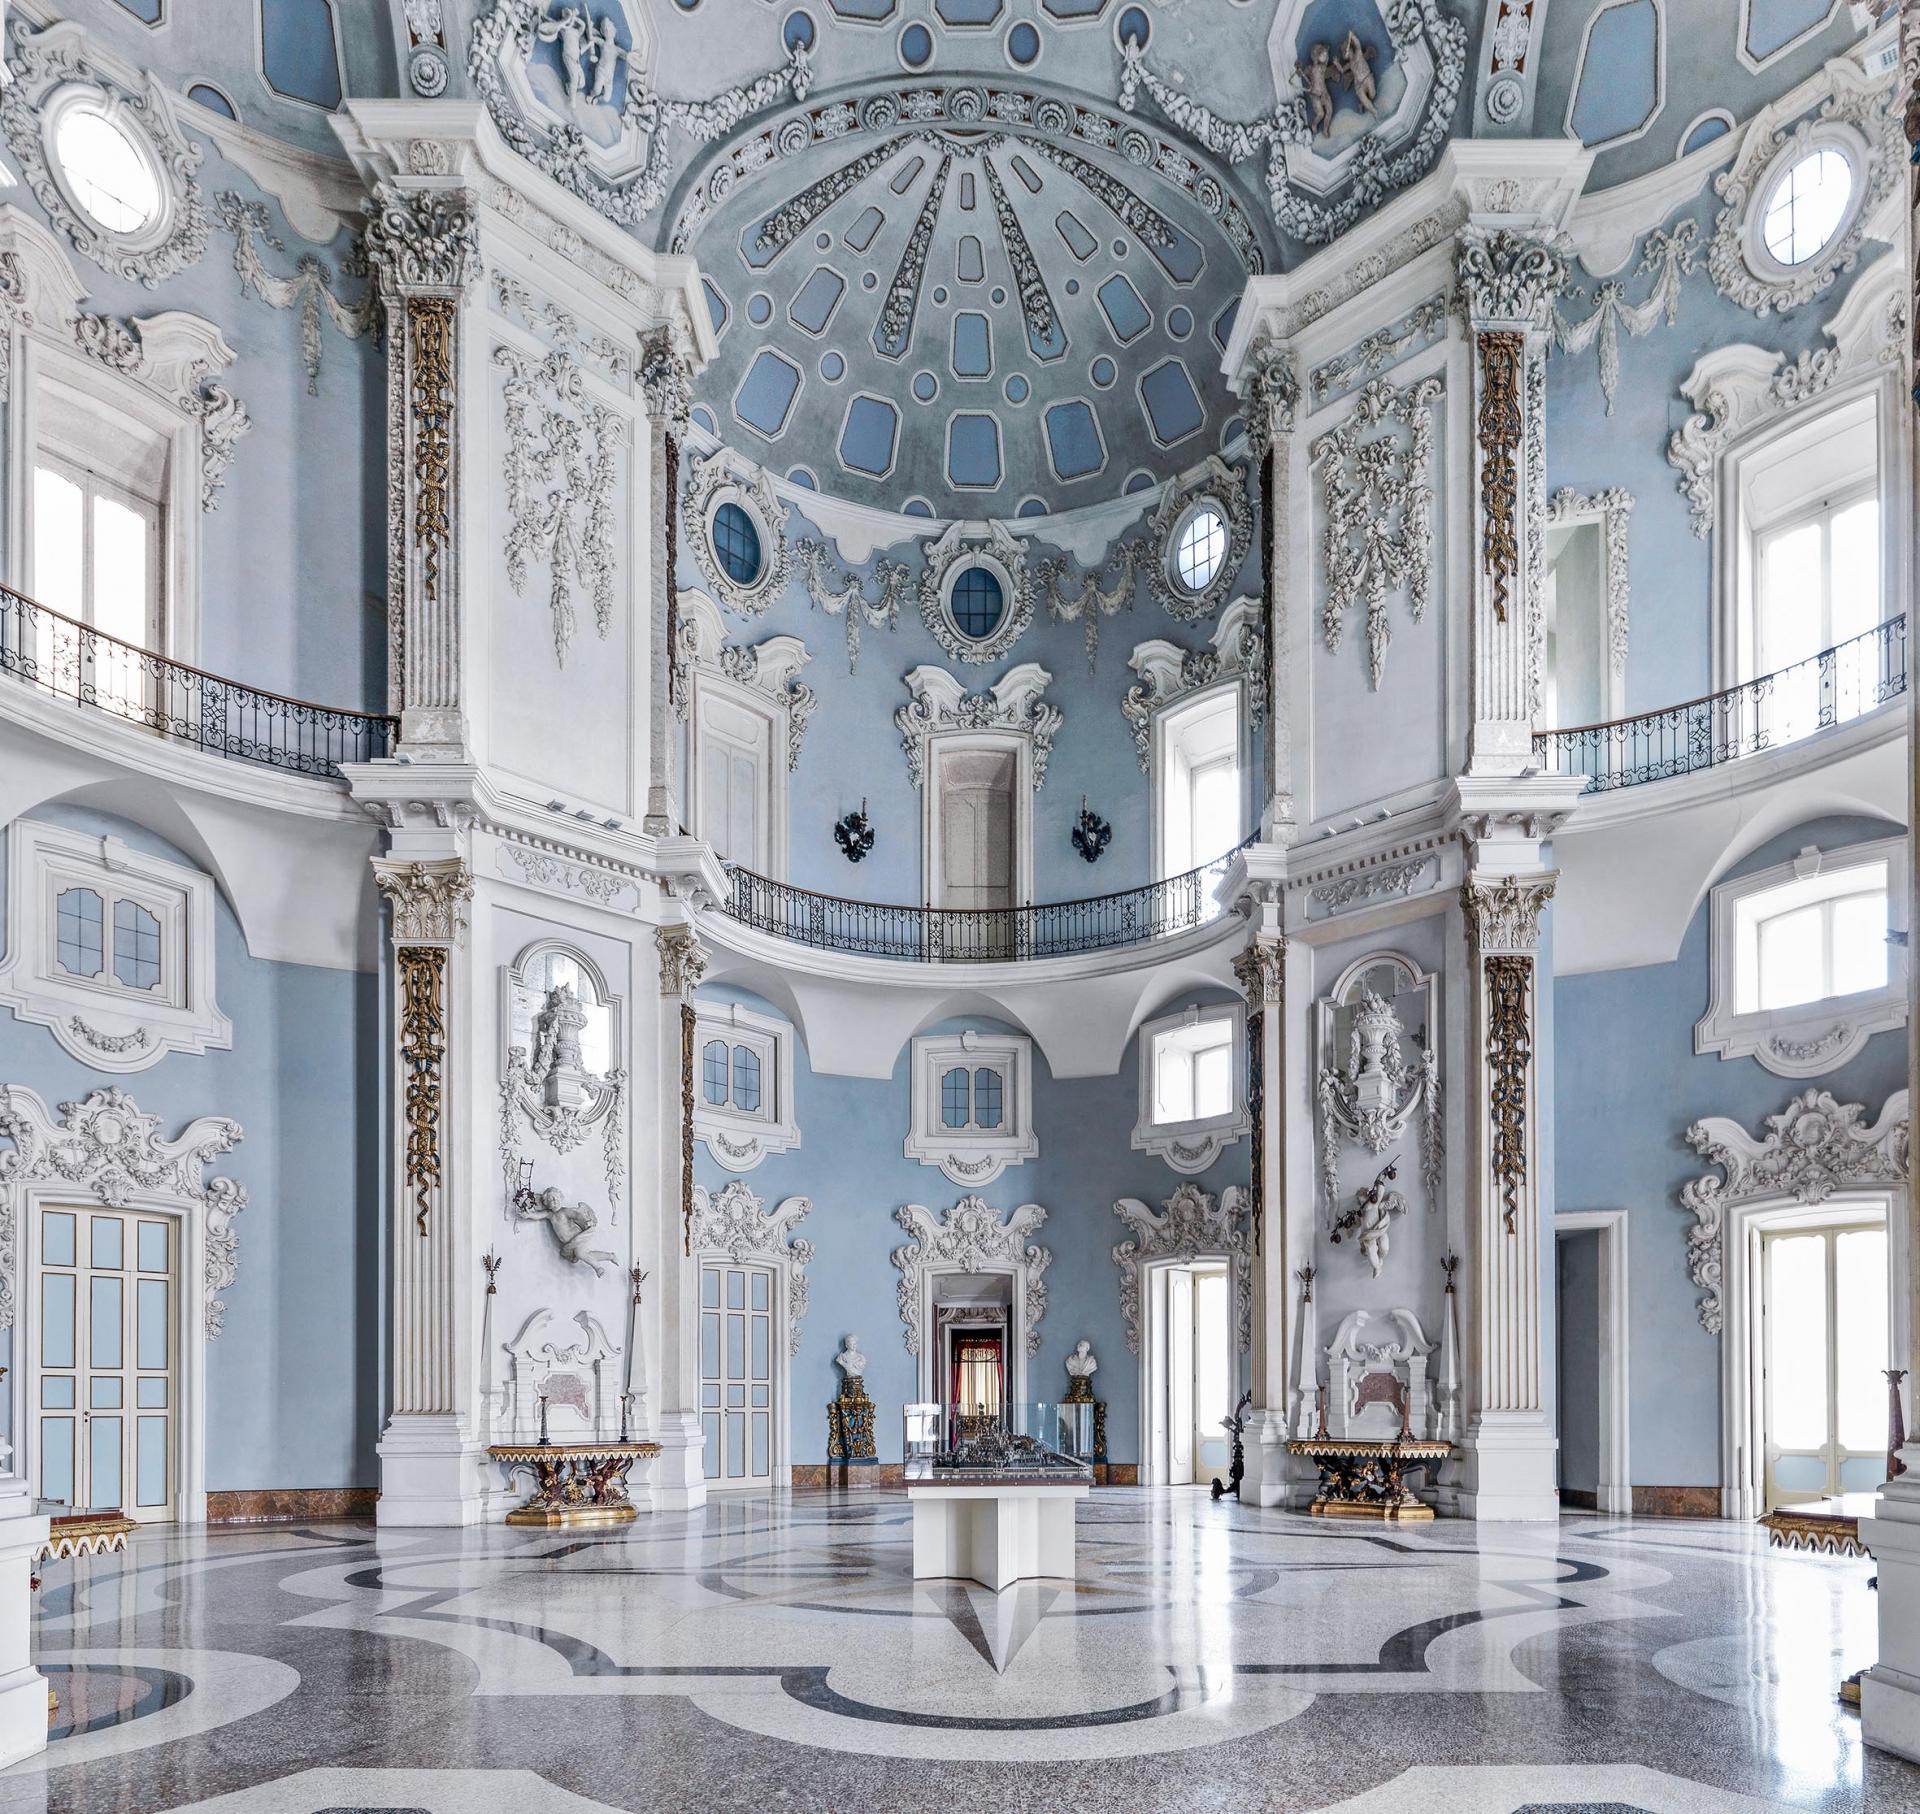 Palazzo Borromeo II, Isola Bella, 2018
C print
180 x 225 cm ( 39.5 x 47 inches)
edition of 5 
Signed and numbered on the verso label

The photographer is based in Florence, and is fascinated how his architectural subject matter allows him to control